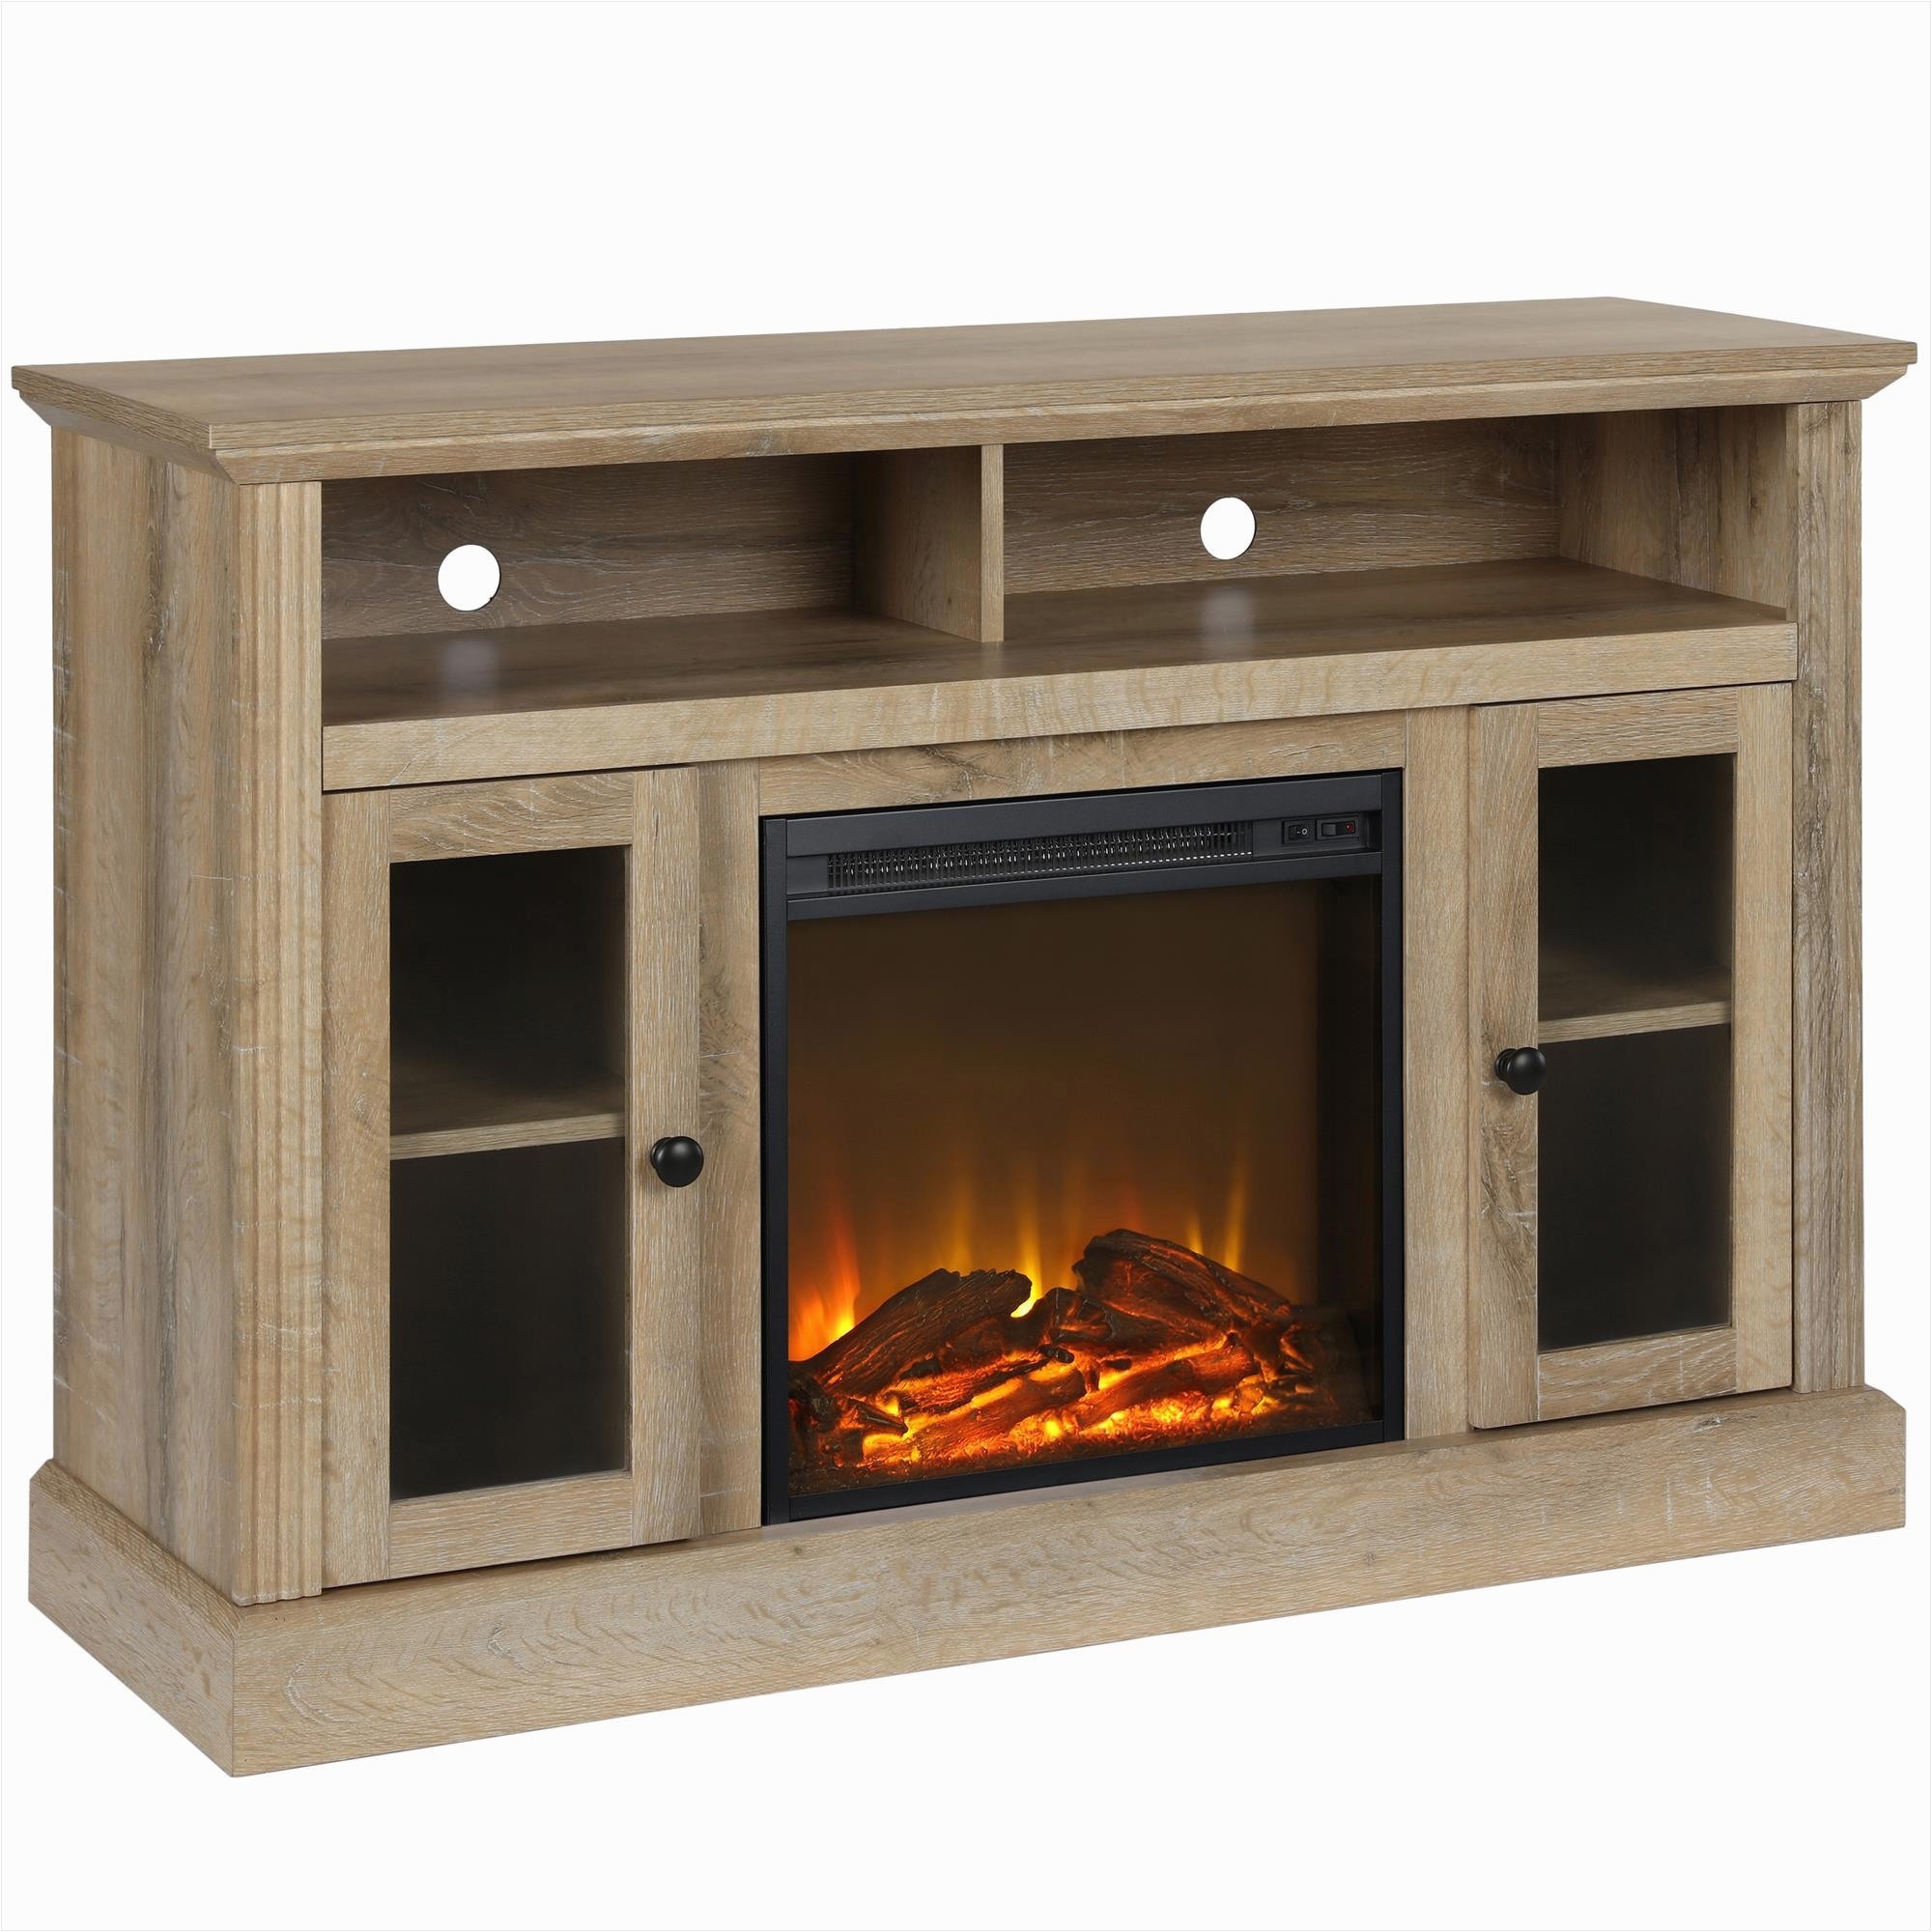 Wooden Fireplace Surround Best Of White Mantel Gas Fireplace